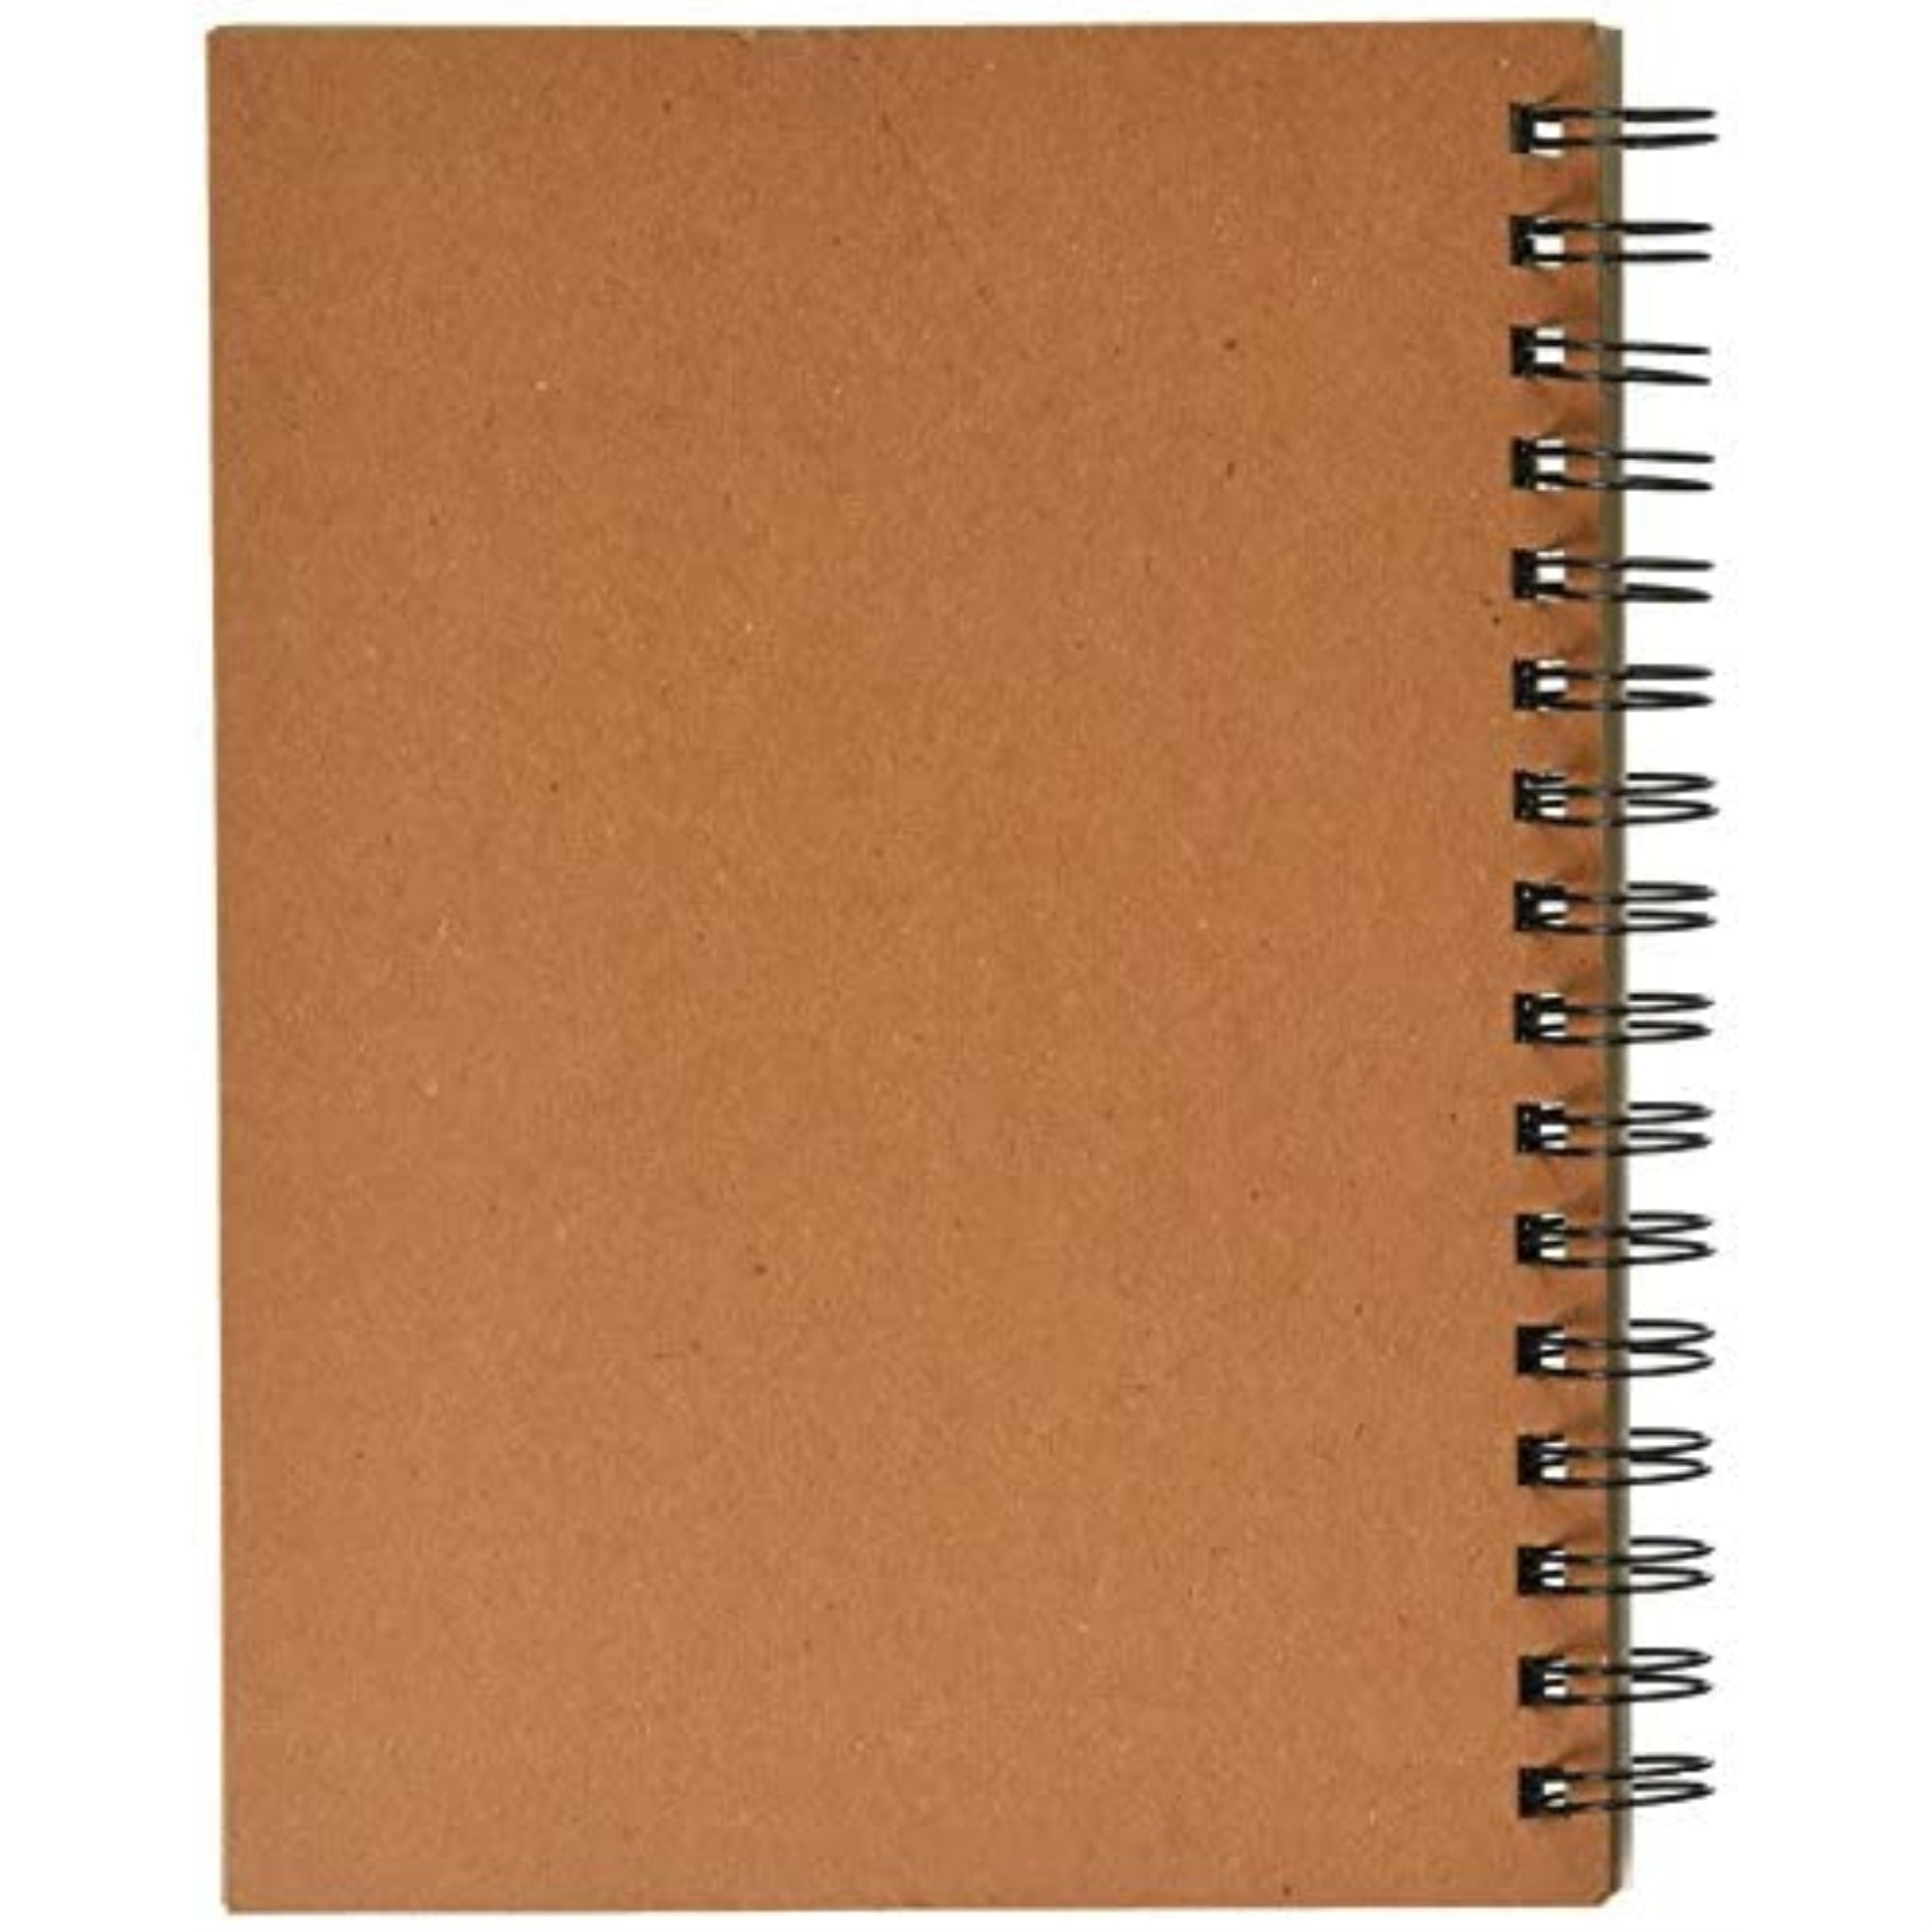 Strathmore Toned Sketch Paper Pad, 400 Series, 18in x 24in, 24 Sheets, Tan